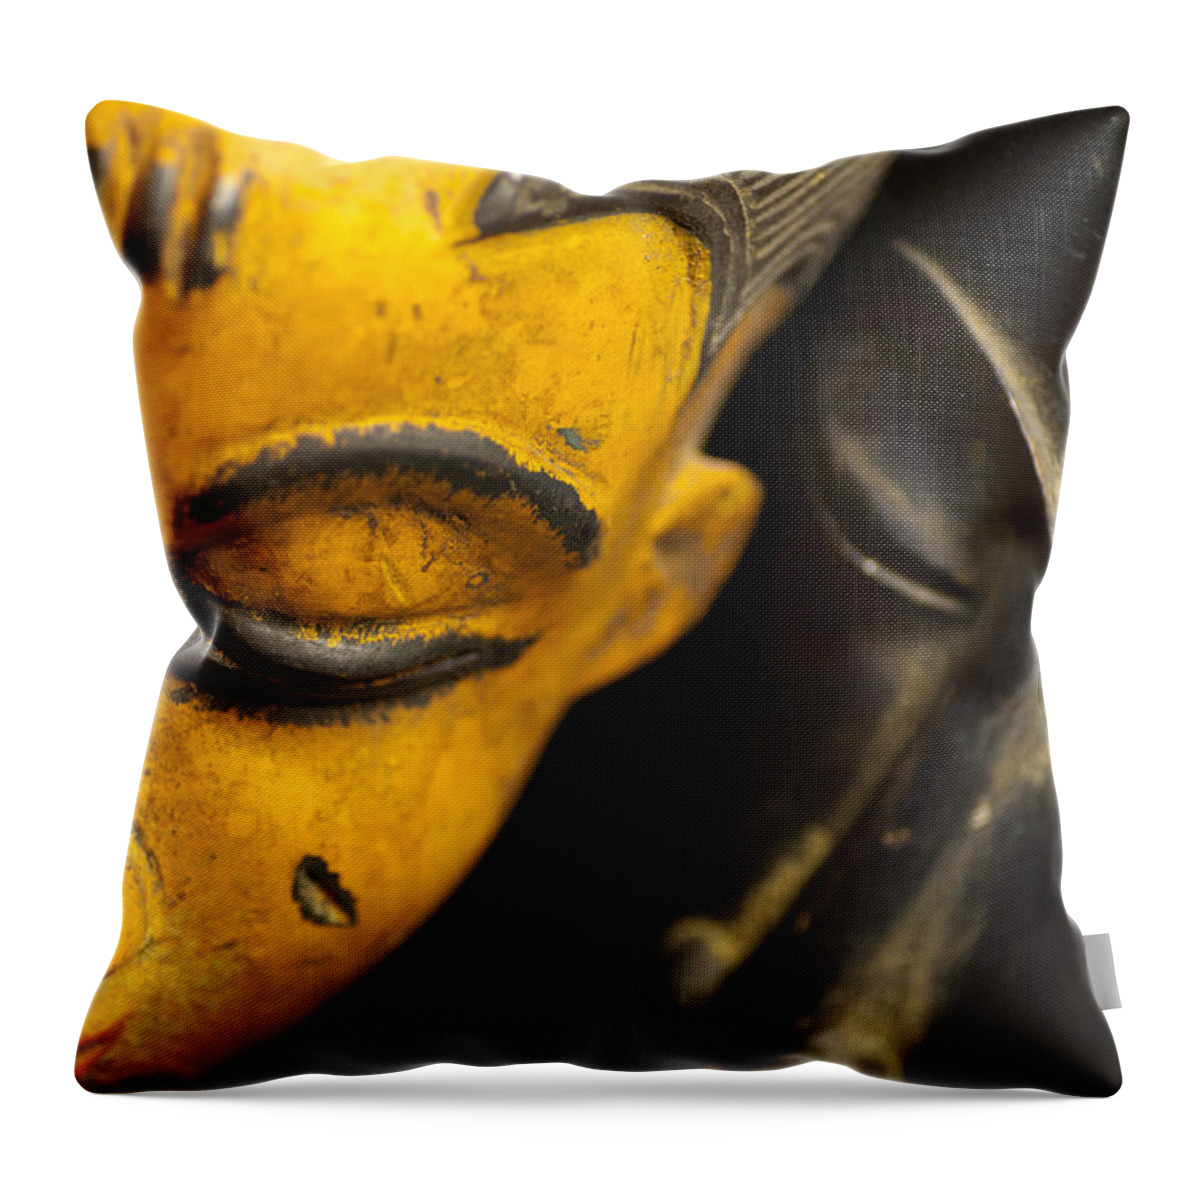 Abstract Throw Pillow featuring the photograph African Masks by Raul Rodriguez